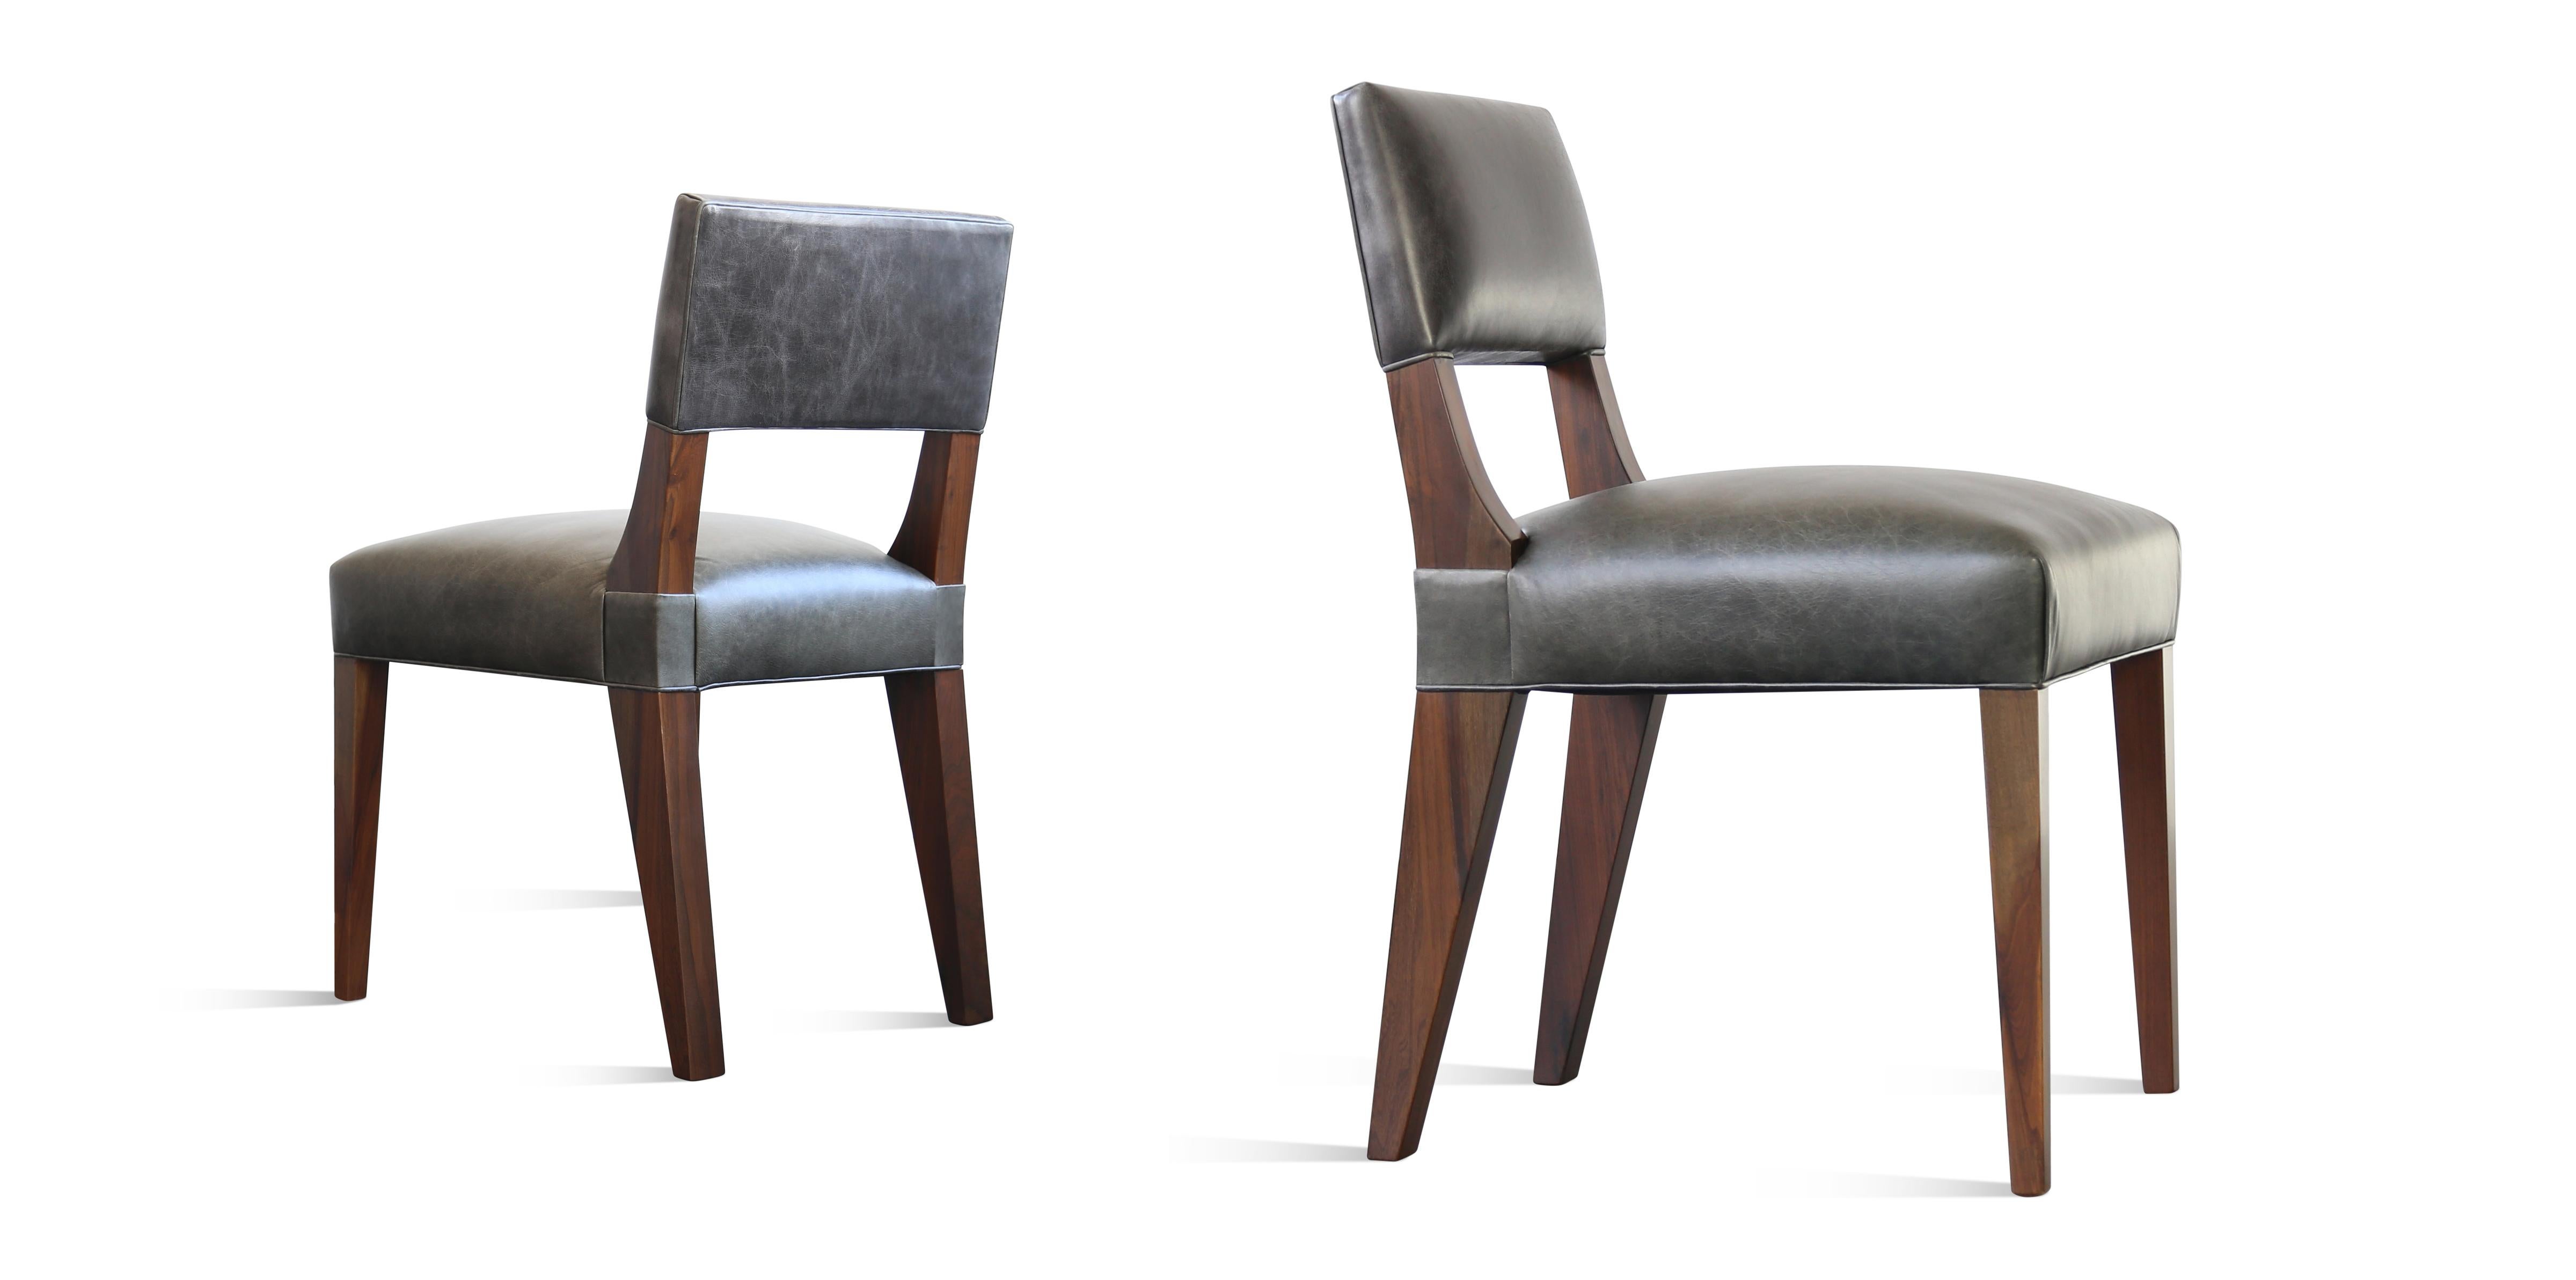 Bruno Modern Dining Chair in Argentine Exotic Wood and Leather from Costantini

Measurements are 19